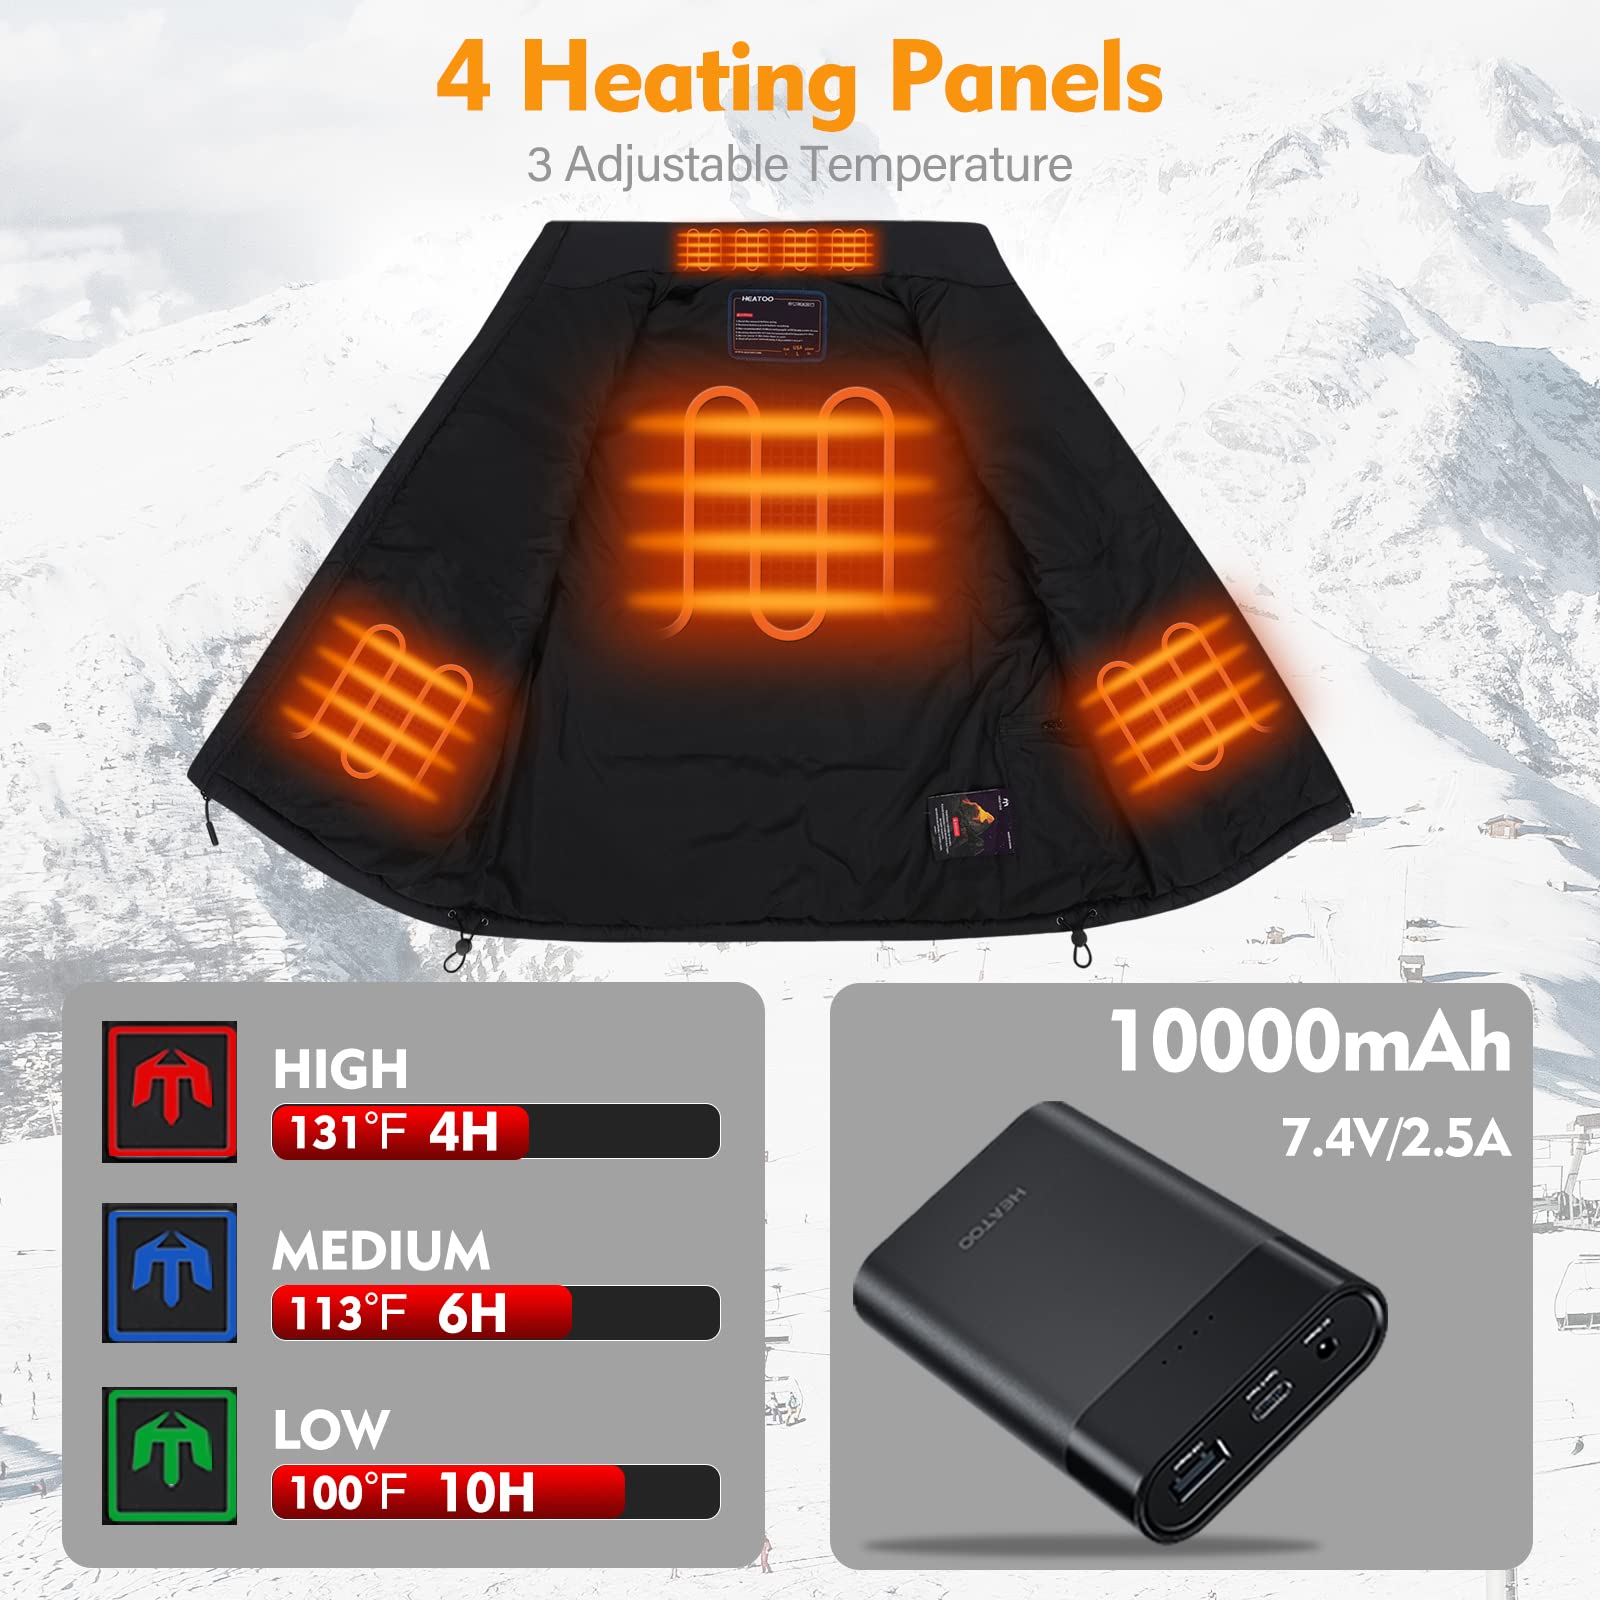 HEATOO Heated Vest for Men , Lightweight Heating Jackets with 10000mah Battery Pack 7.4V for Skiing Ice Fishing Hunting